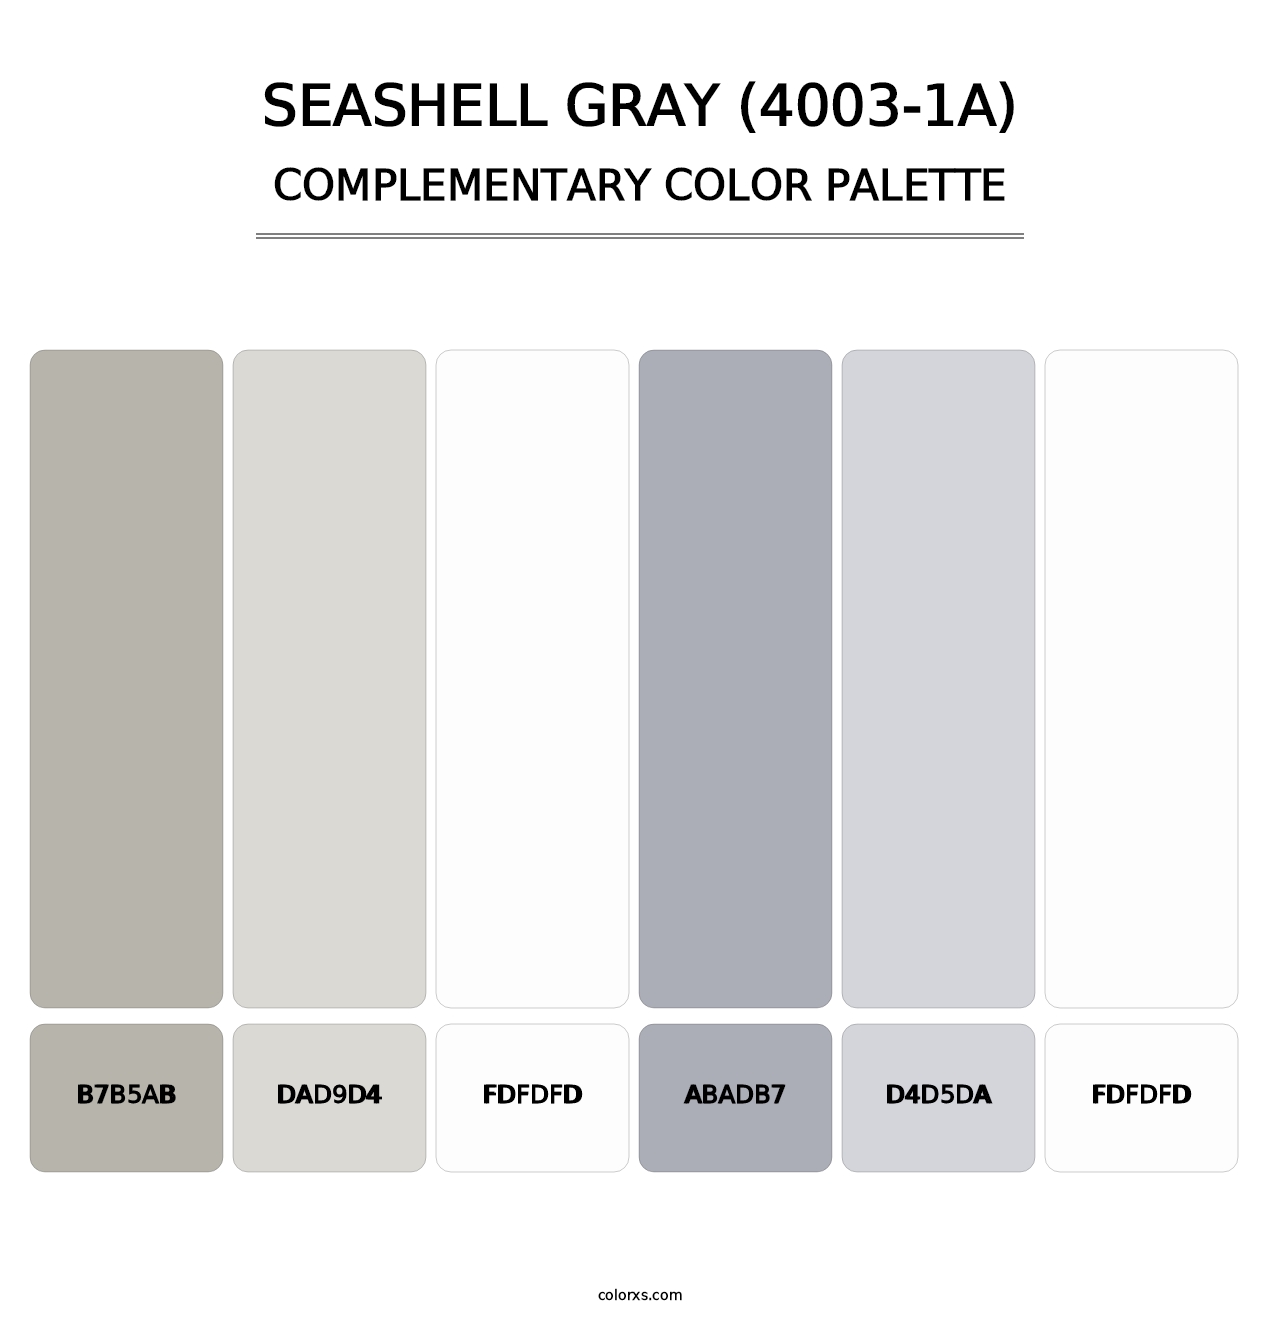 Seashell Gray (4003-1A) - Complementary Color Palette